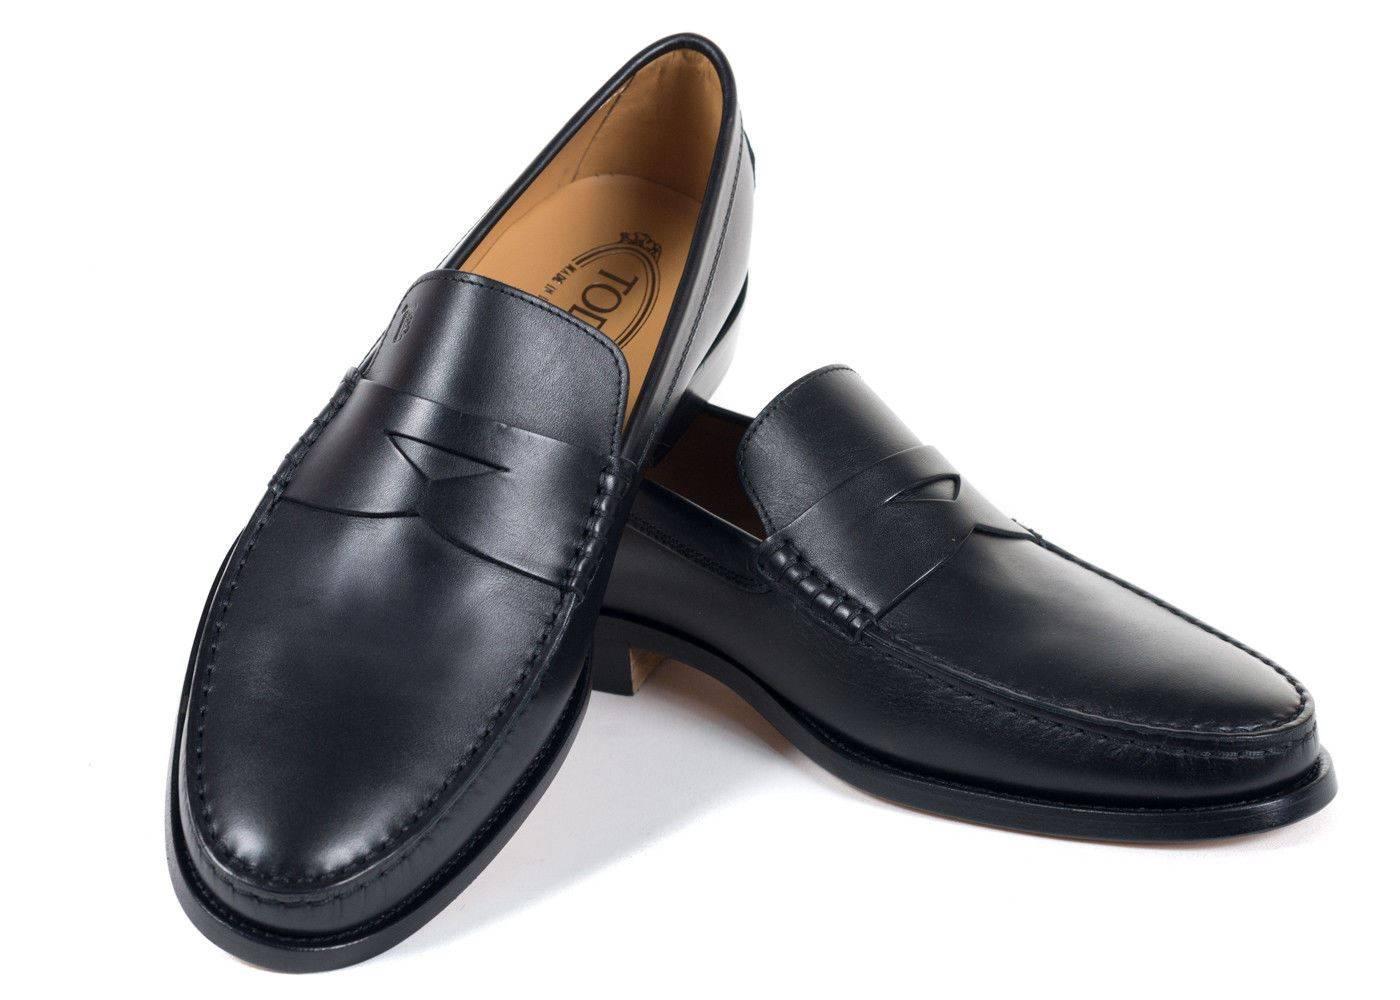 Brand New Tod's Men's Loafers
Original Box & Dust Bag Included
Retails in Stores & Online for $495
UK 10/ US 11
All Shoes are in UK Sizing

Tod's classic penny loafers crafted in black calfskin leather for an ultra smooth look to these shoes. These